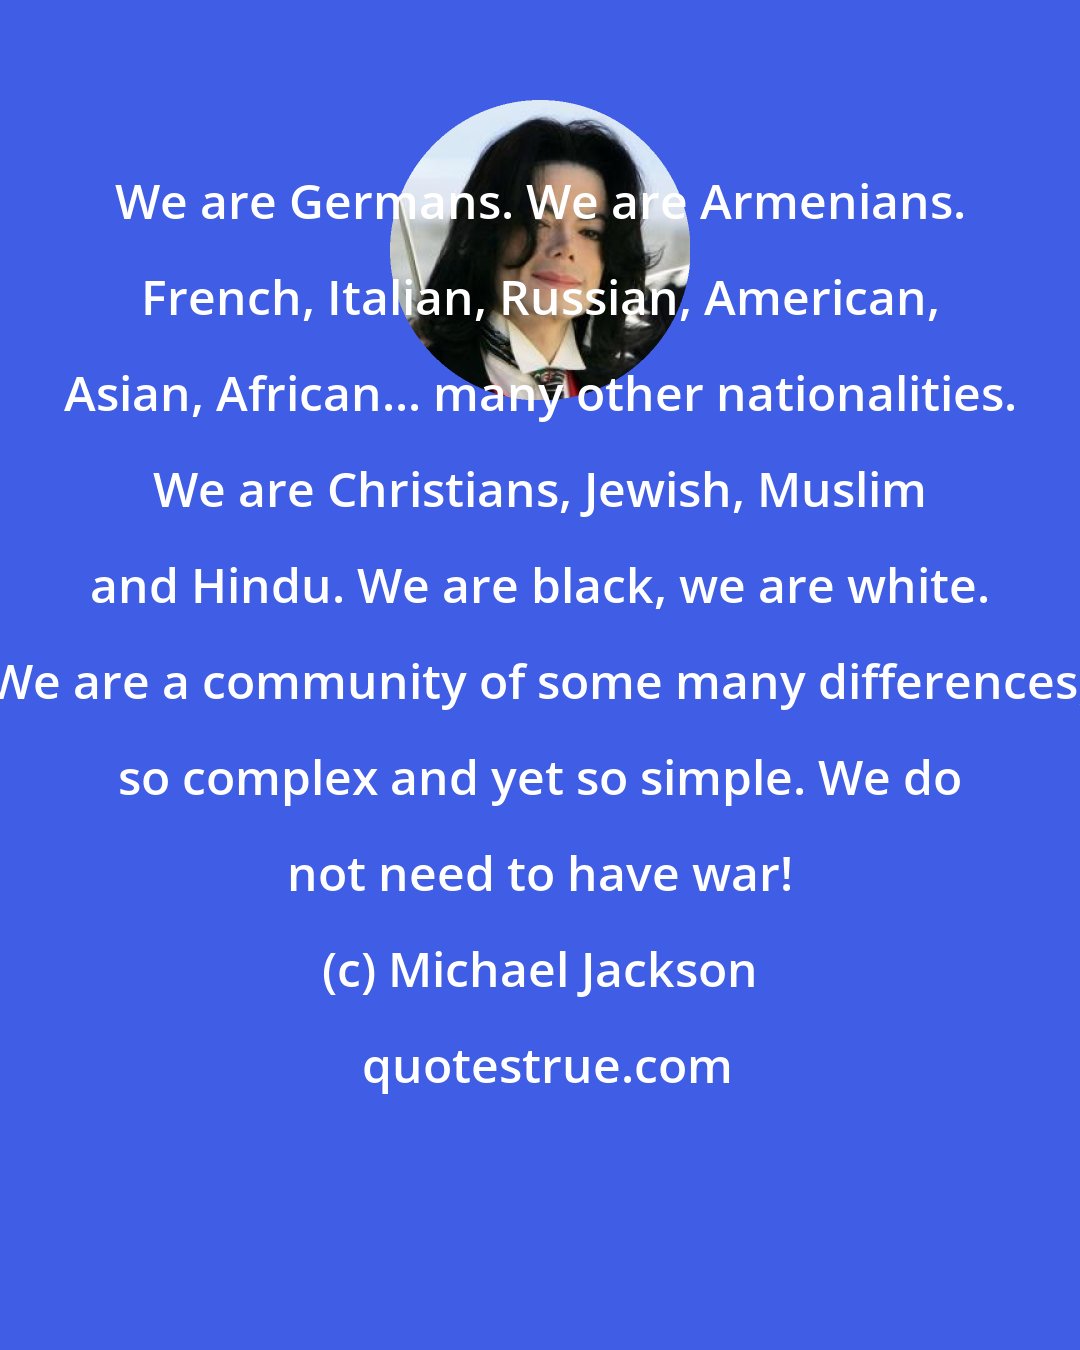 Michael Jackson: We are Germans. We are Armenians. French, Italian, Russian, American, Asian, African... many other nationalities. We are Christians, Jewish, Muslim and Hindu. We are black, we are white. We are a community of some many differences, so complex and yet so simple. We do not need to have war!